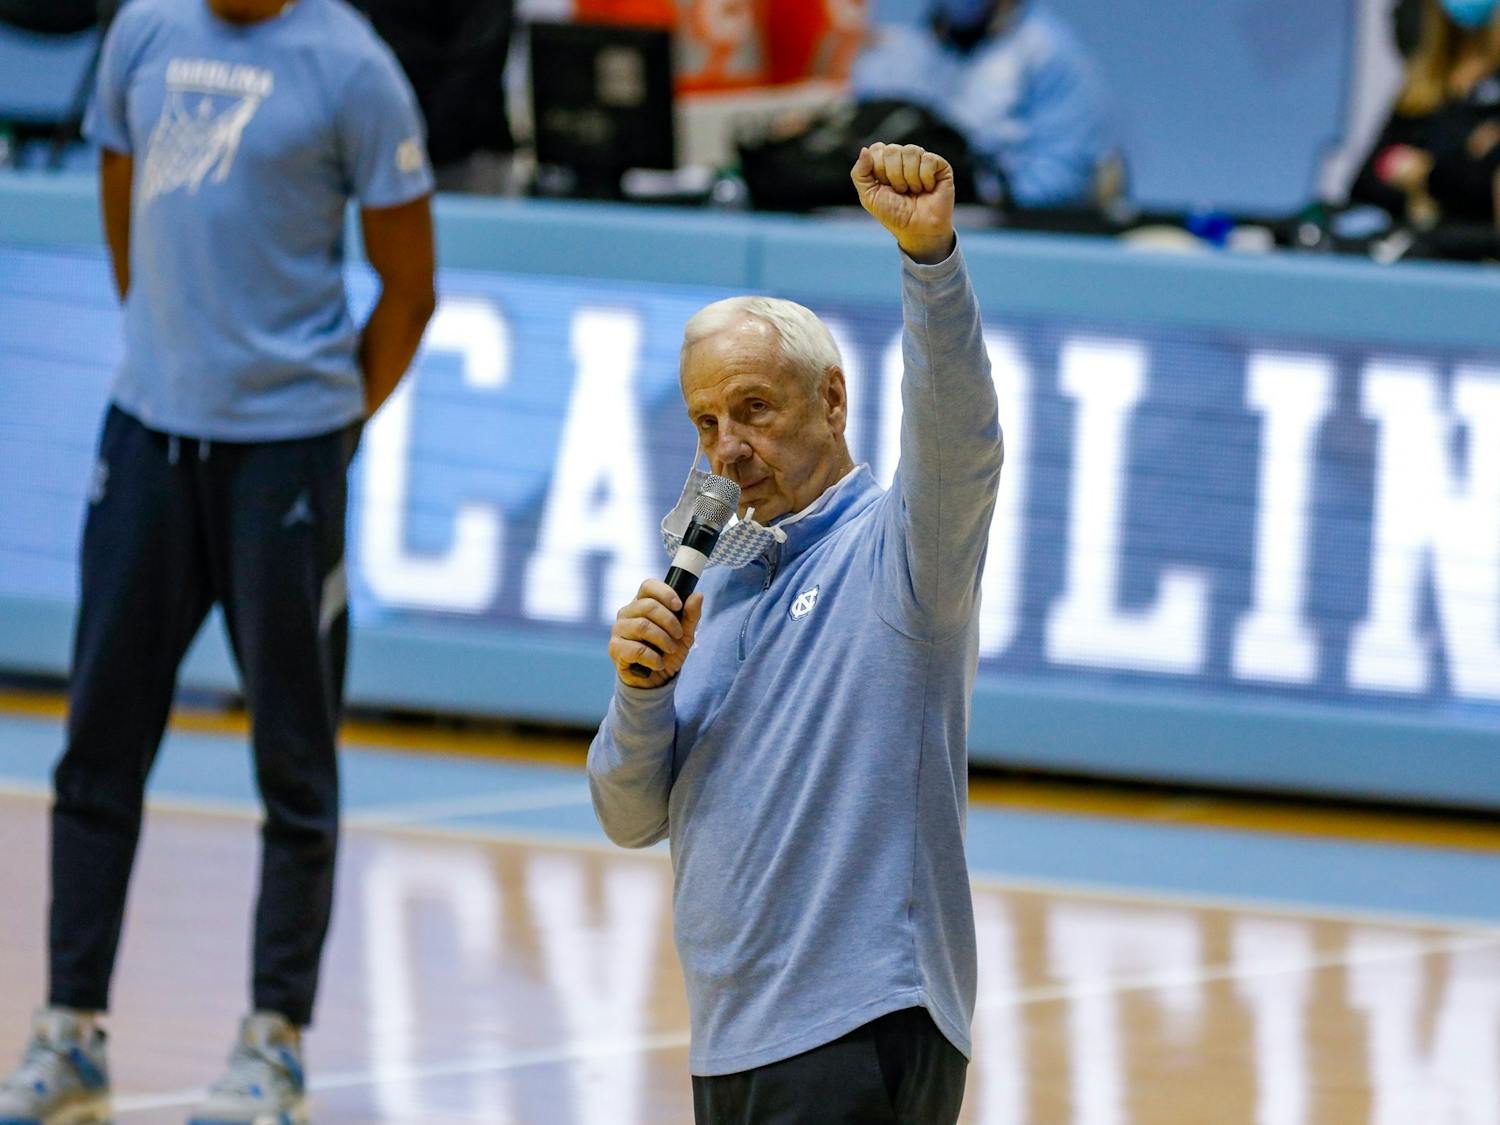 UNC head coach Roy Williams gives a speech on senior night in the Dean Dome on March 6, 2021. The Tar Heels beat the Blue Devils 91-73.